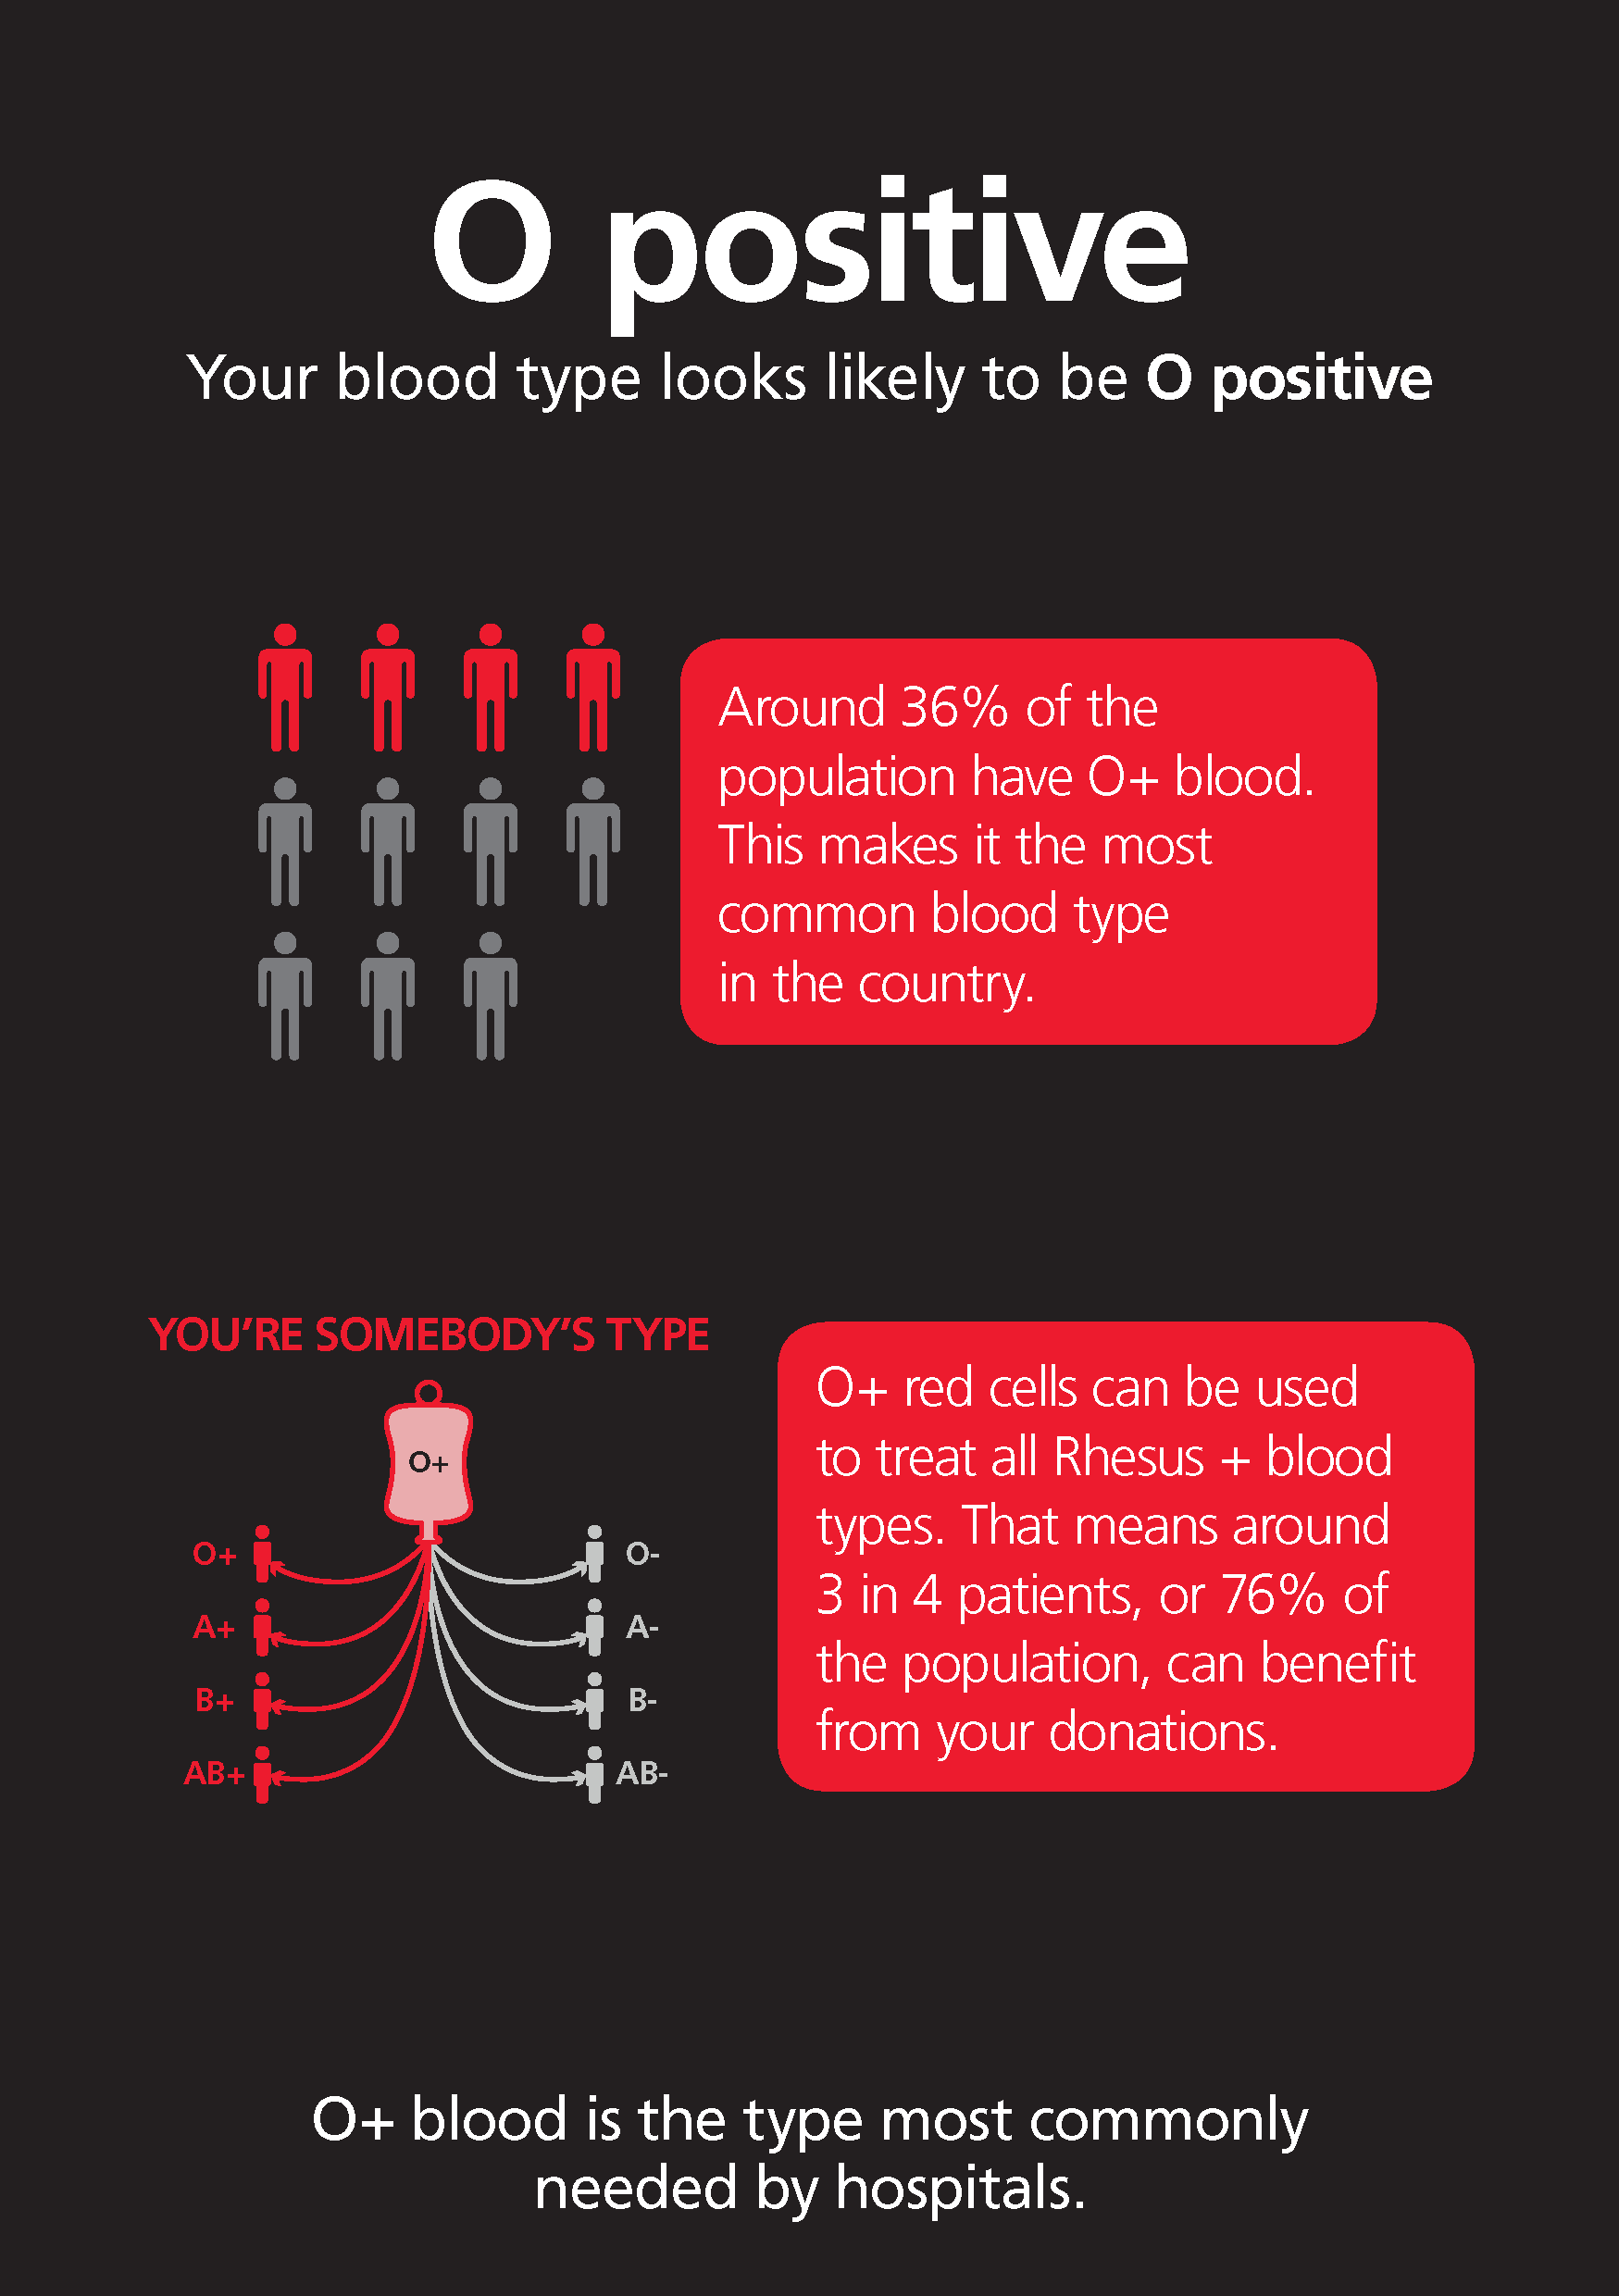 Can blood type o+ and o have a baby?